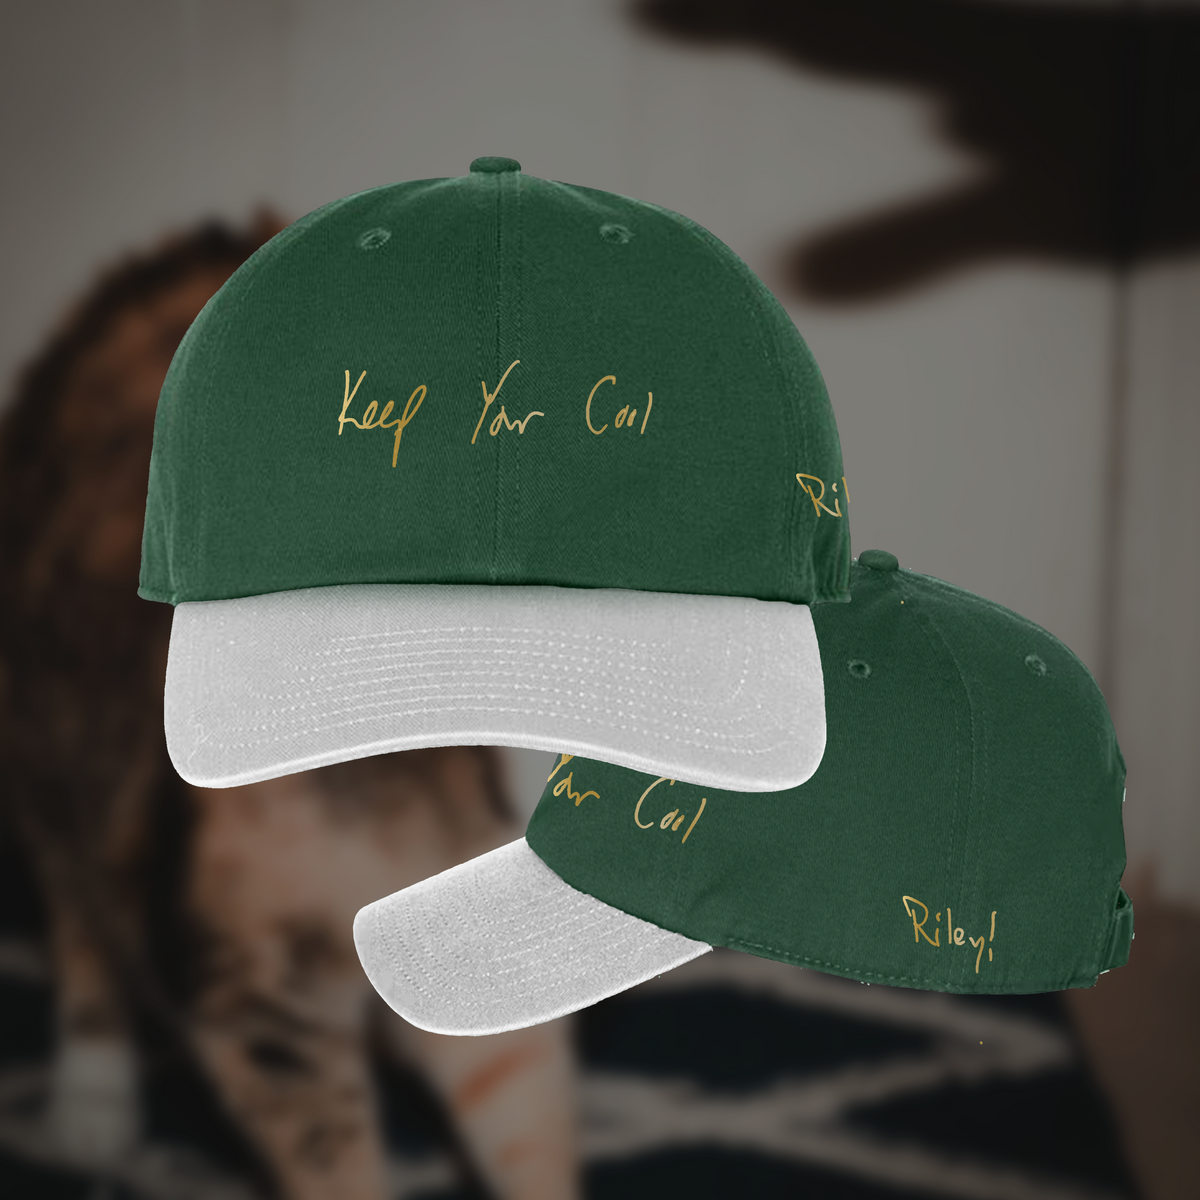 Riley! - Embroidered Hat (Pre-Order)